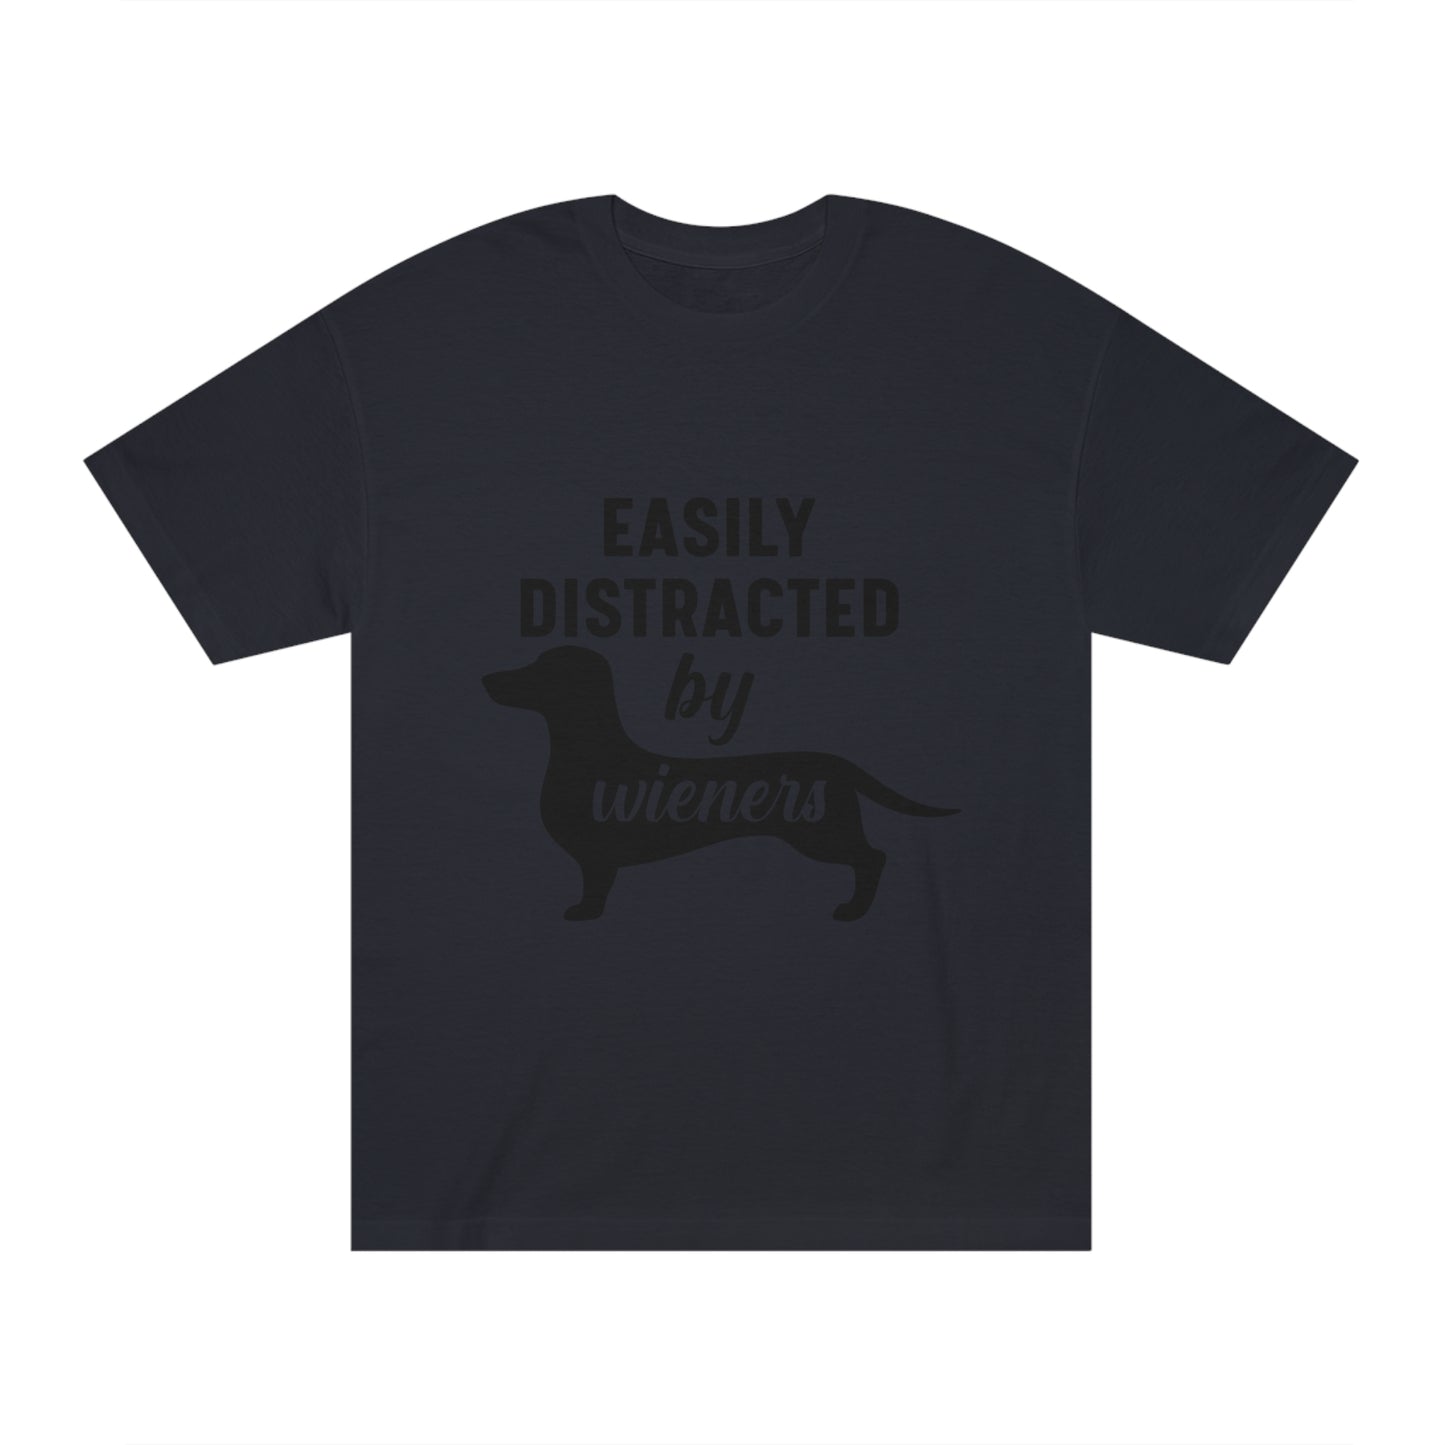 Easily distracted by wieners Unisex Classic Tee